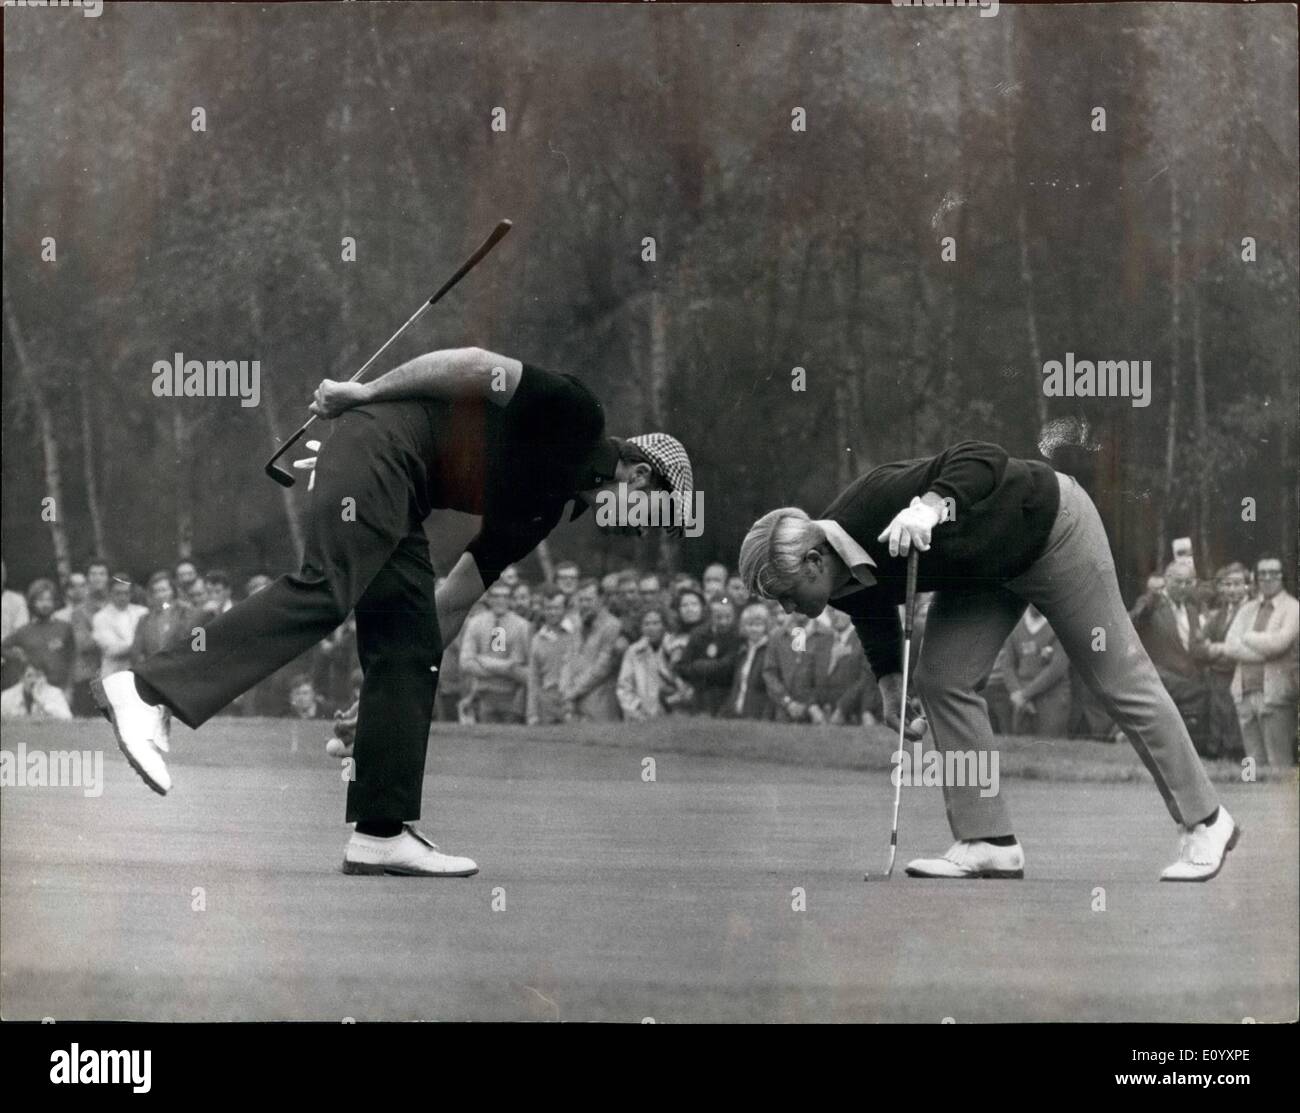 Oct. 10, 1971 - GARY PLAYER WINS THE PICADILLY WORLD MATCH - PLAY CHAMPIONSHIP. Springbok GARY PLAYER gained one of his greatest golfing triumphe yesterday, When he beat the American giant JACK NICKLAUS in the Piccadilly World Match Play Championship final at Wentworth Yesterday. PHOTO SHOWS:- A Simulatansous examination of the green by GARY PLAYER and JACK NICKLAUS, at Wentworth yesterday. Stock Photo